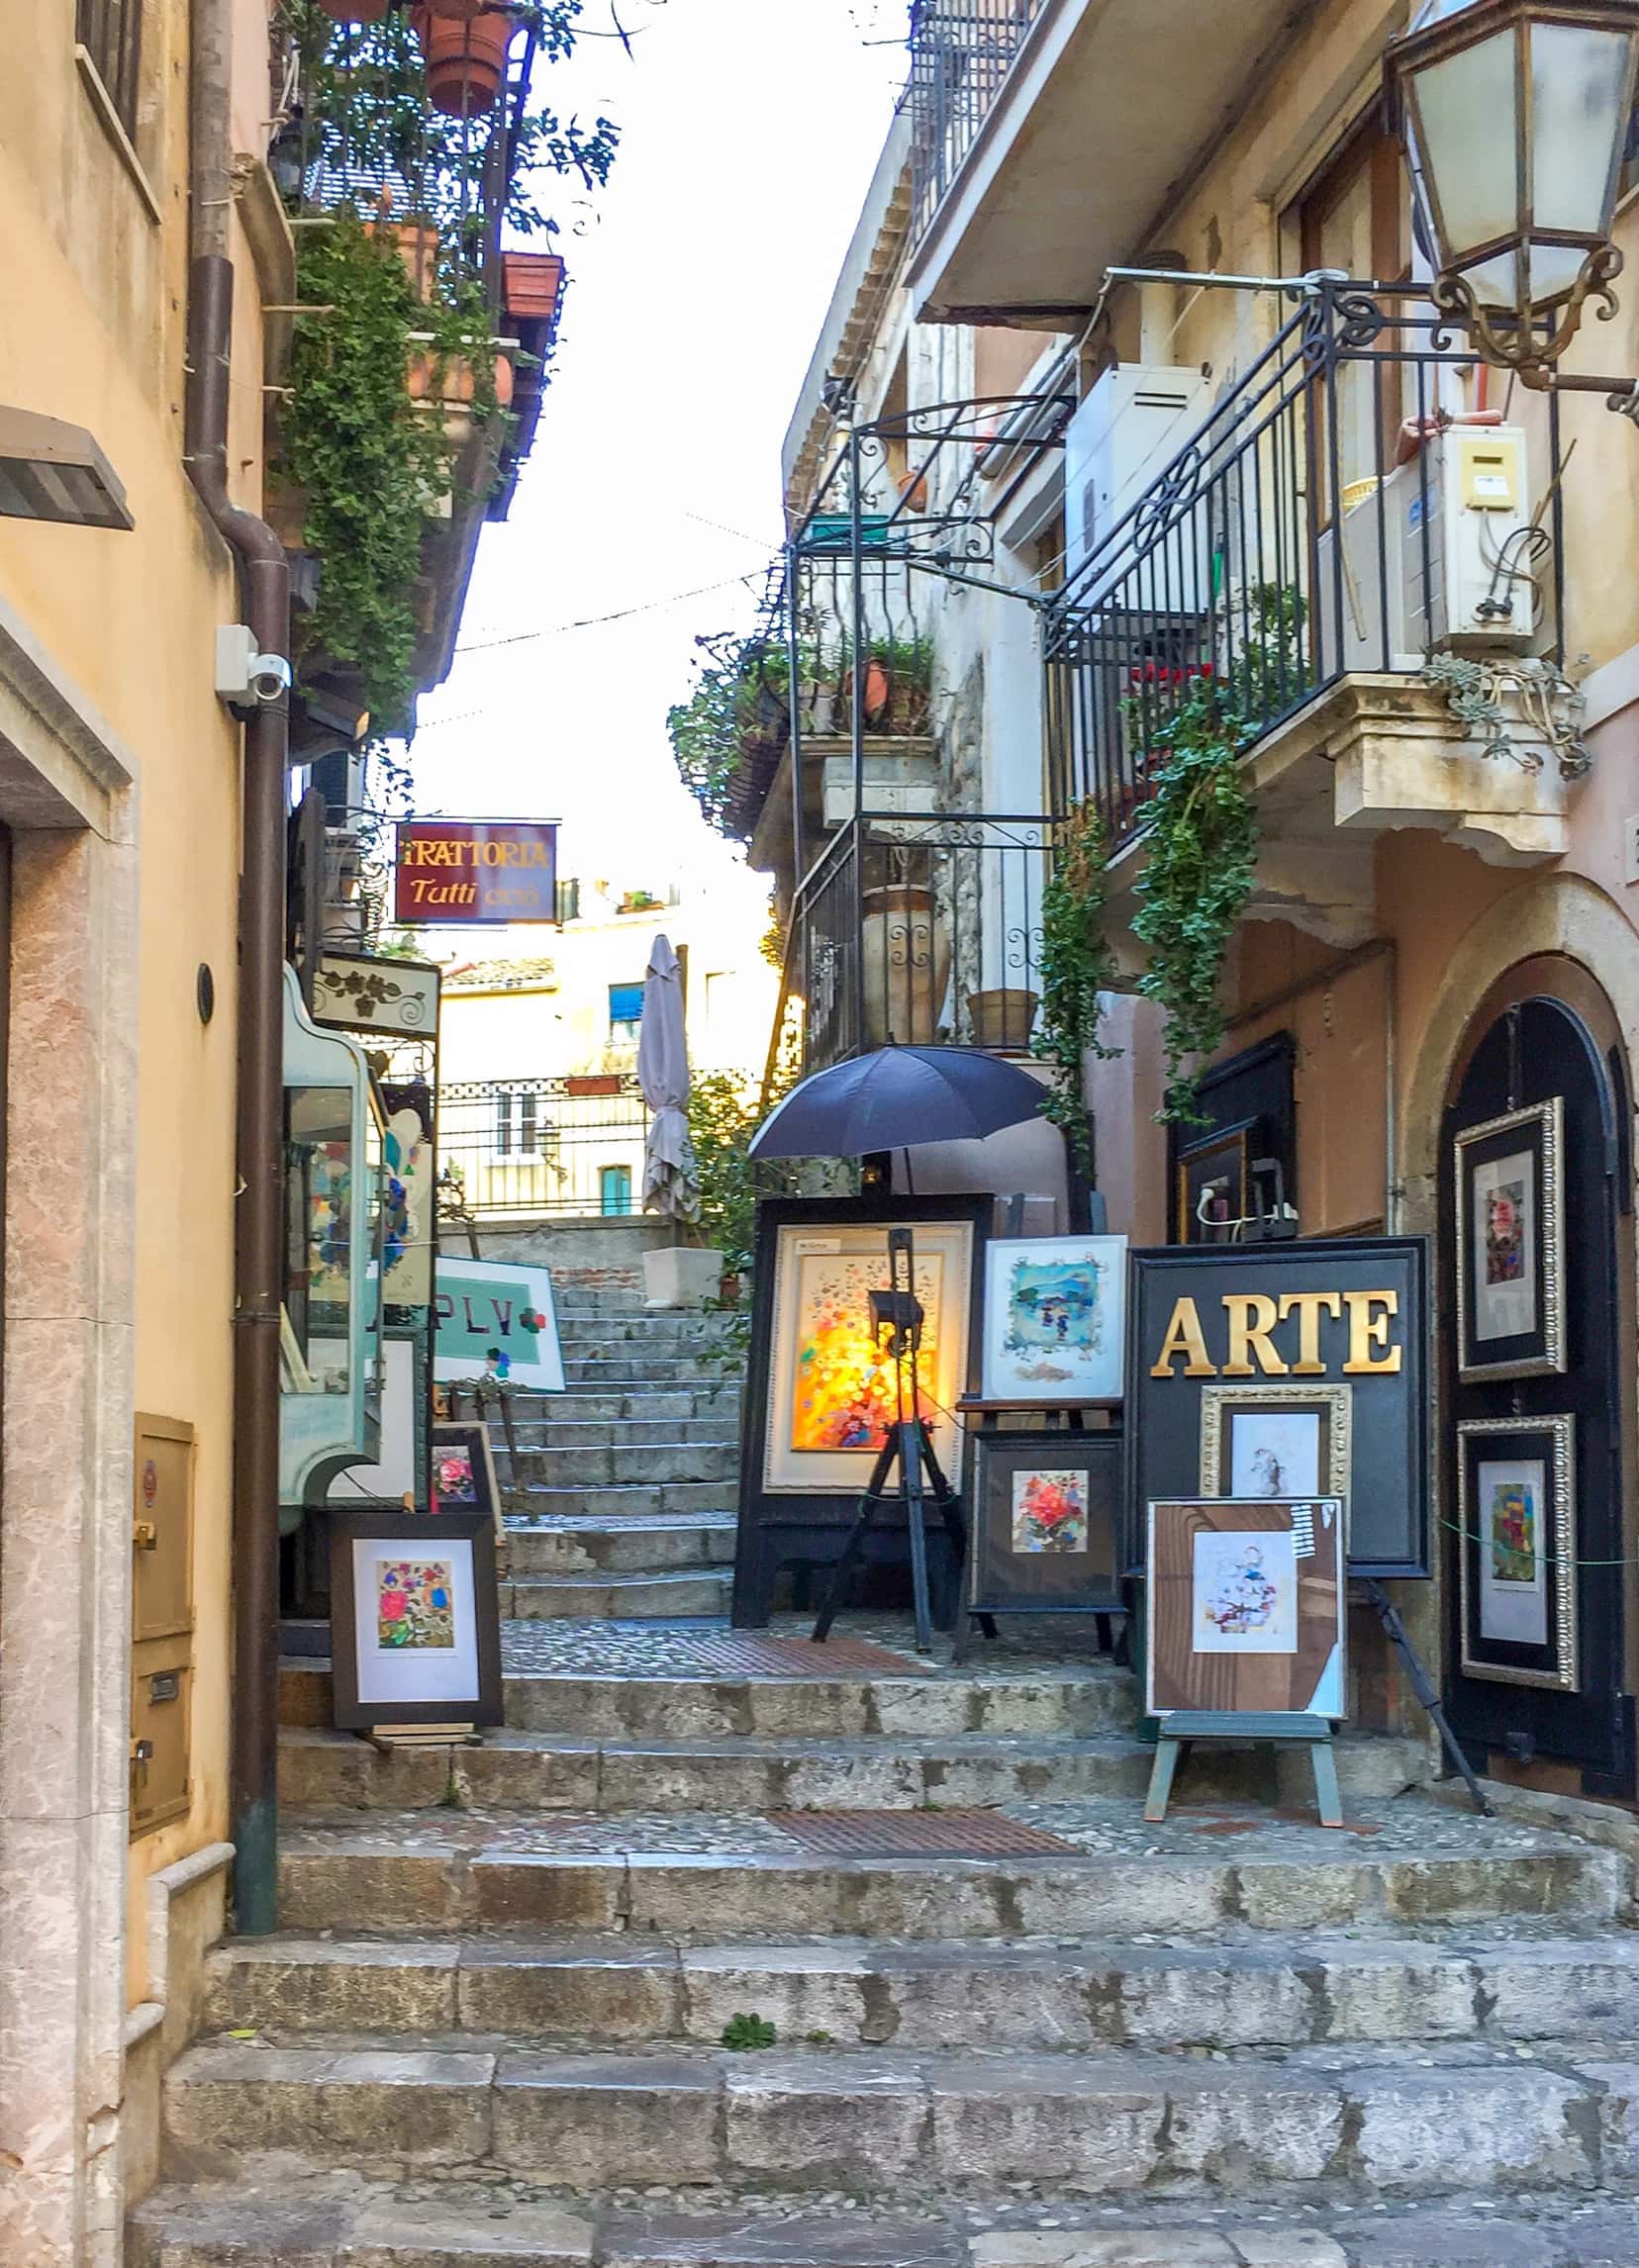 A side street showing art on the steps in Taormina